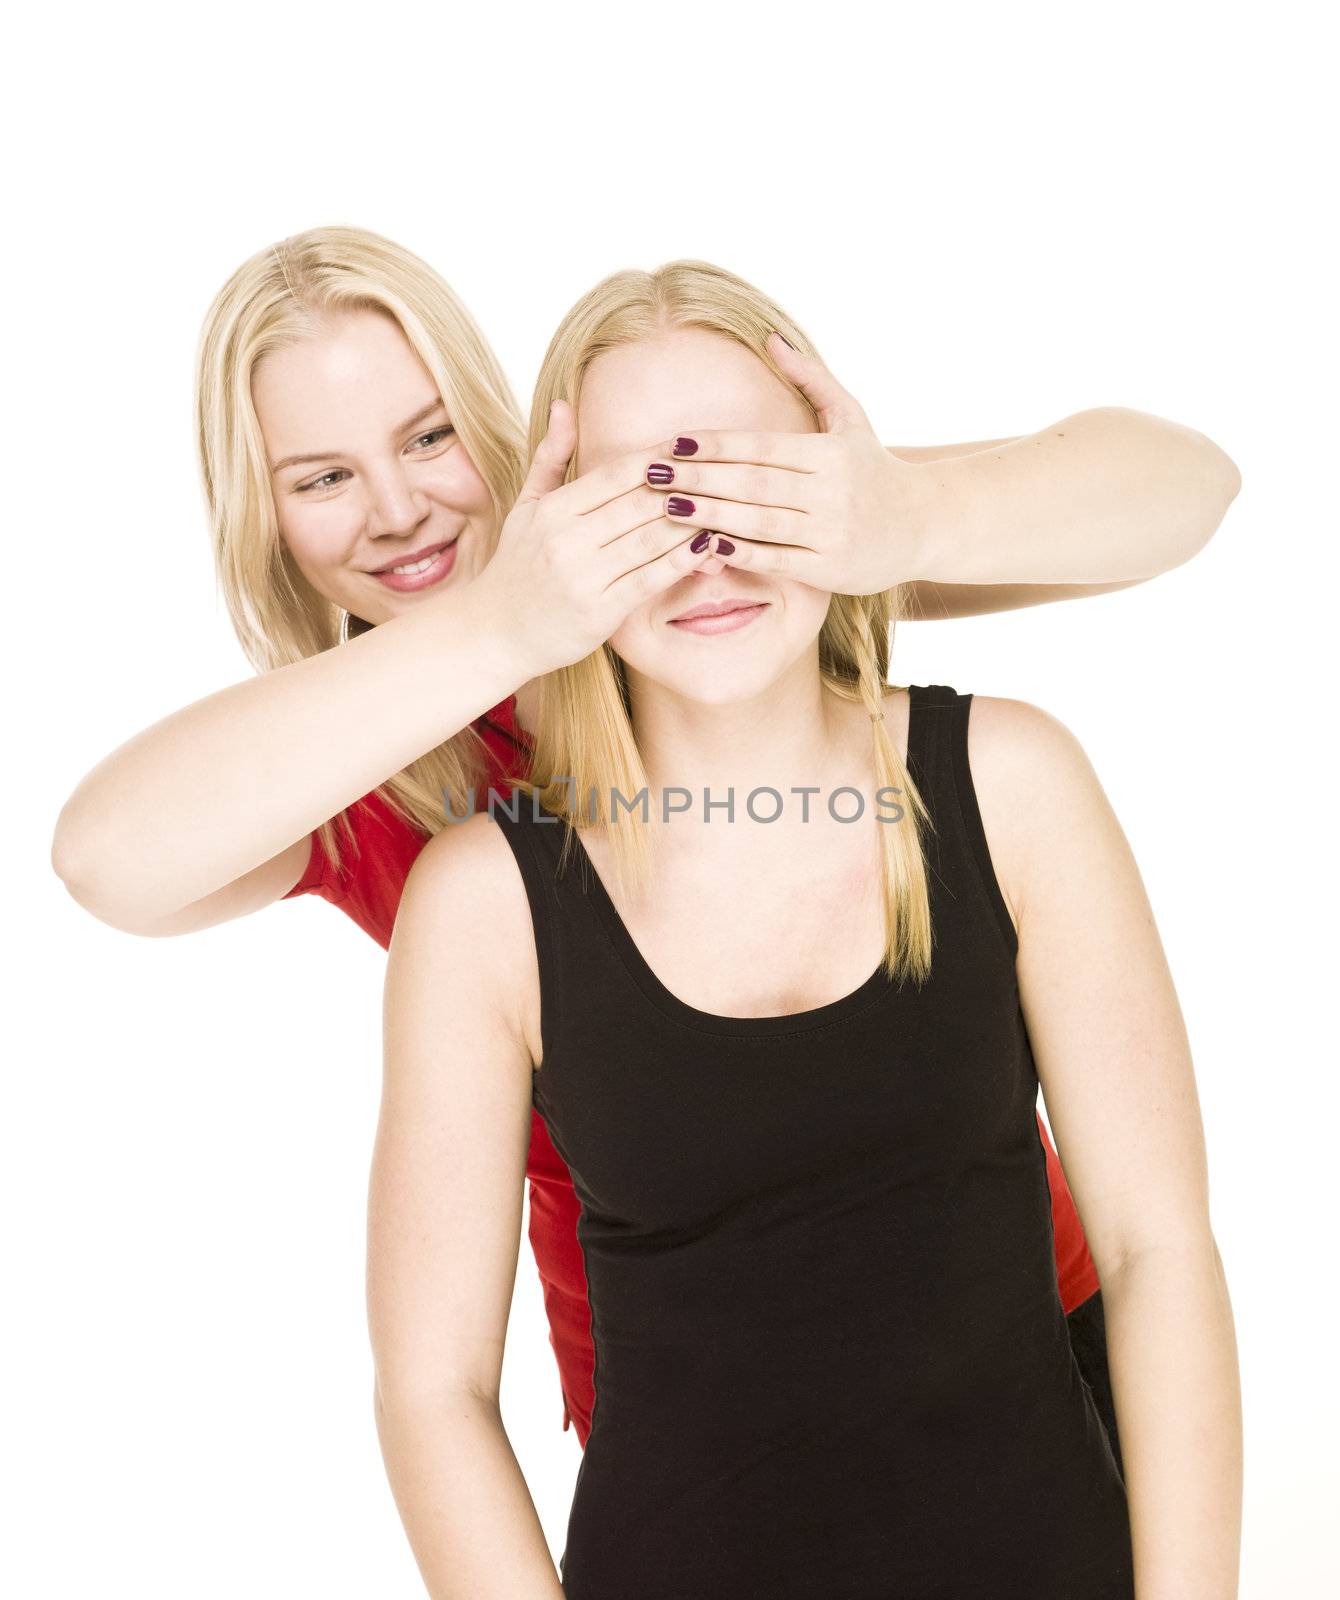 Girls playing Peek-a-boo isolated on white background